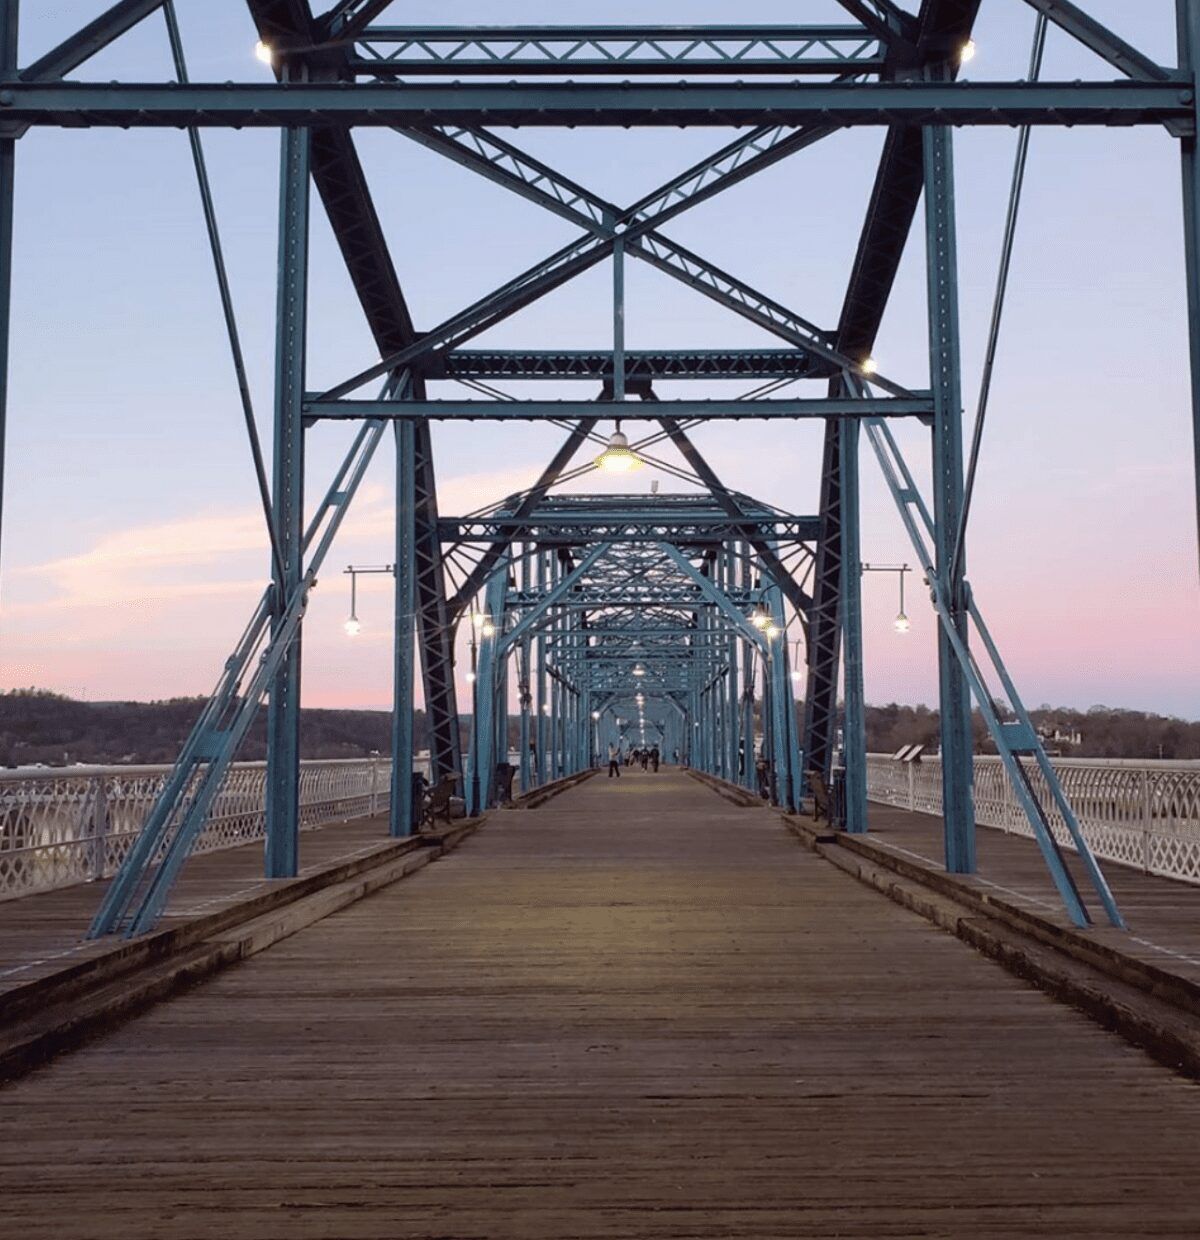 Tourist walking over the bridge in Chattanooga, TN Image: Kathy Brown